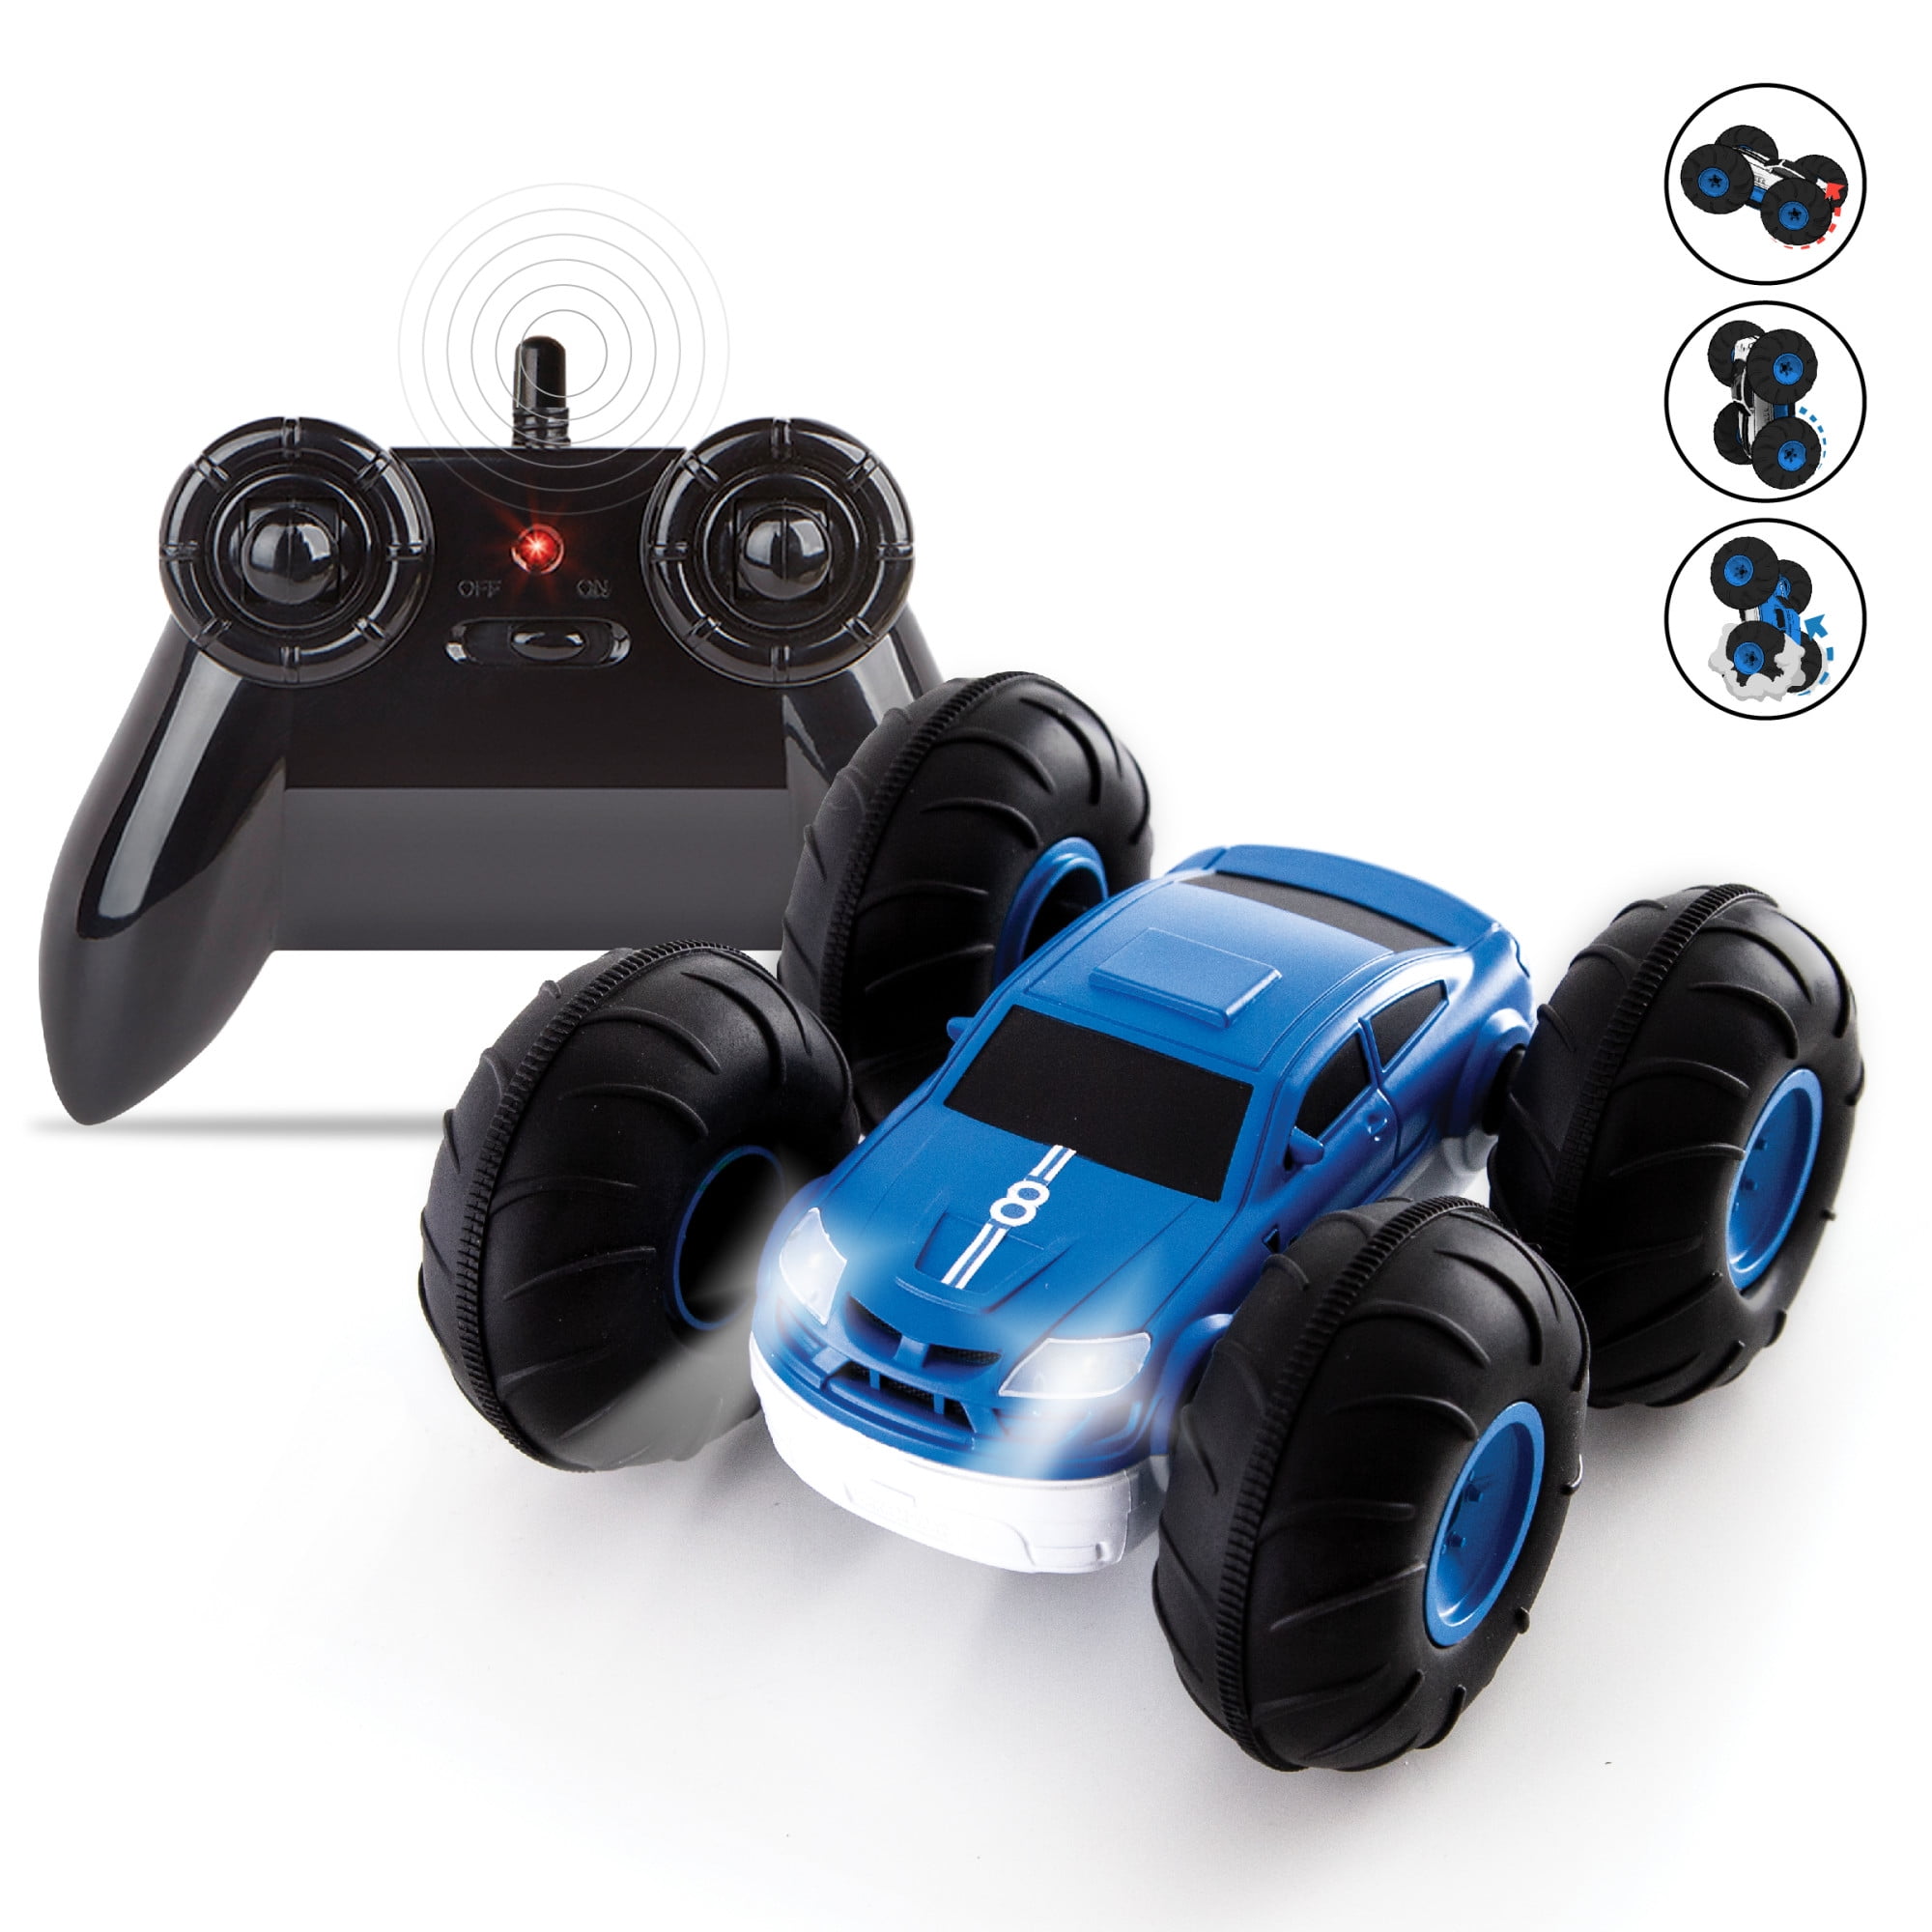 Sharper Image® Toy RC Flip Stunt Rally Remote Control Stunt Vehicle with 2-in-1 Reversible Design for Racing, Led Headlights, 2-pieces, Blue/White, Age 6+